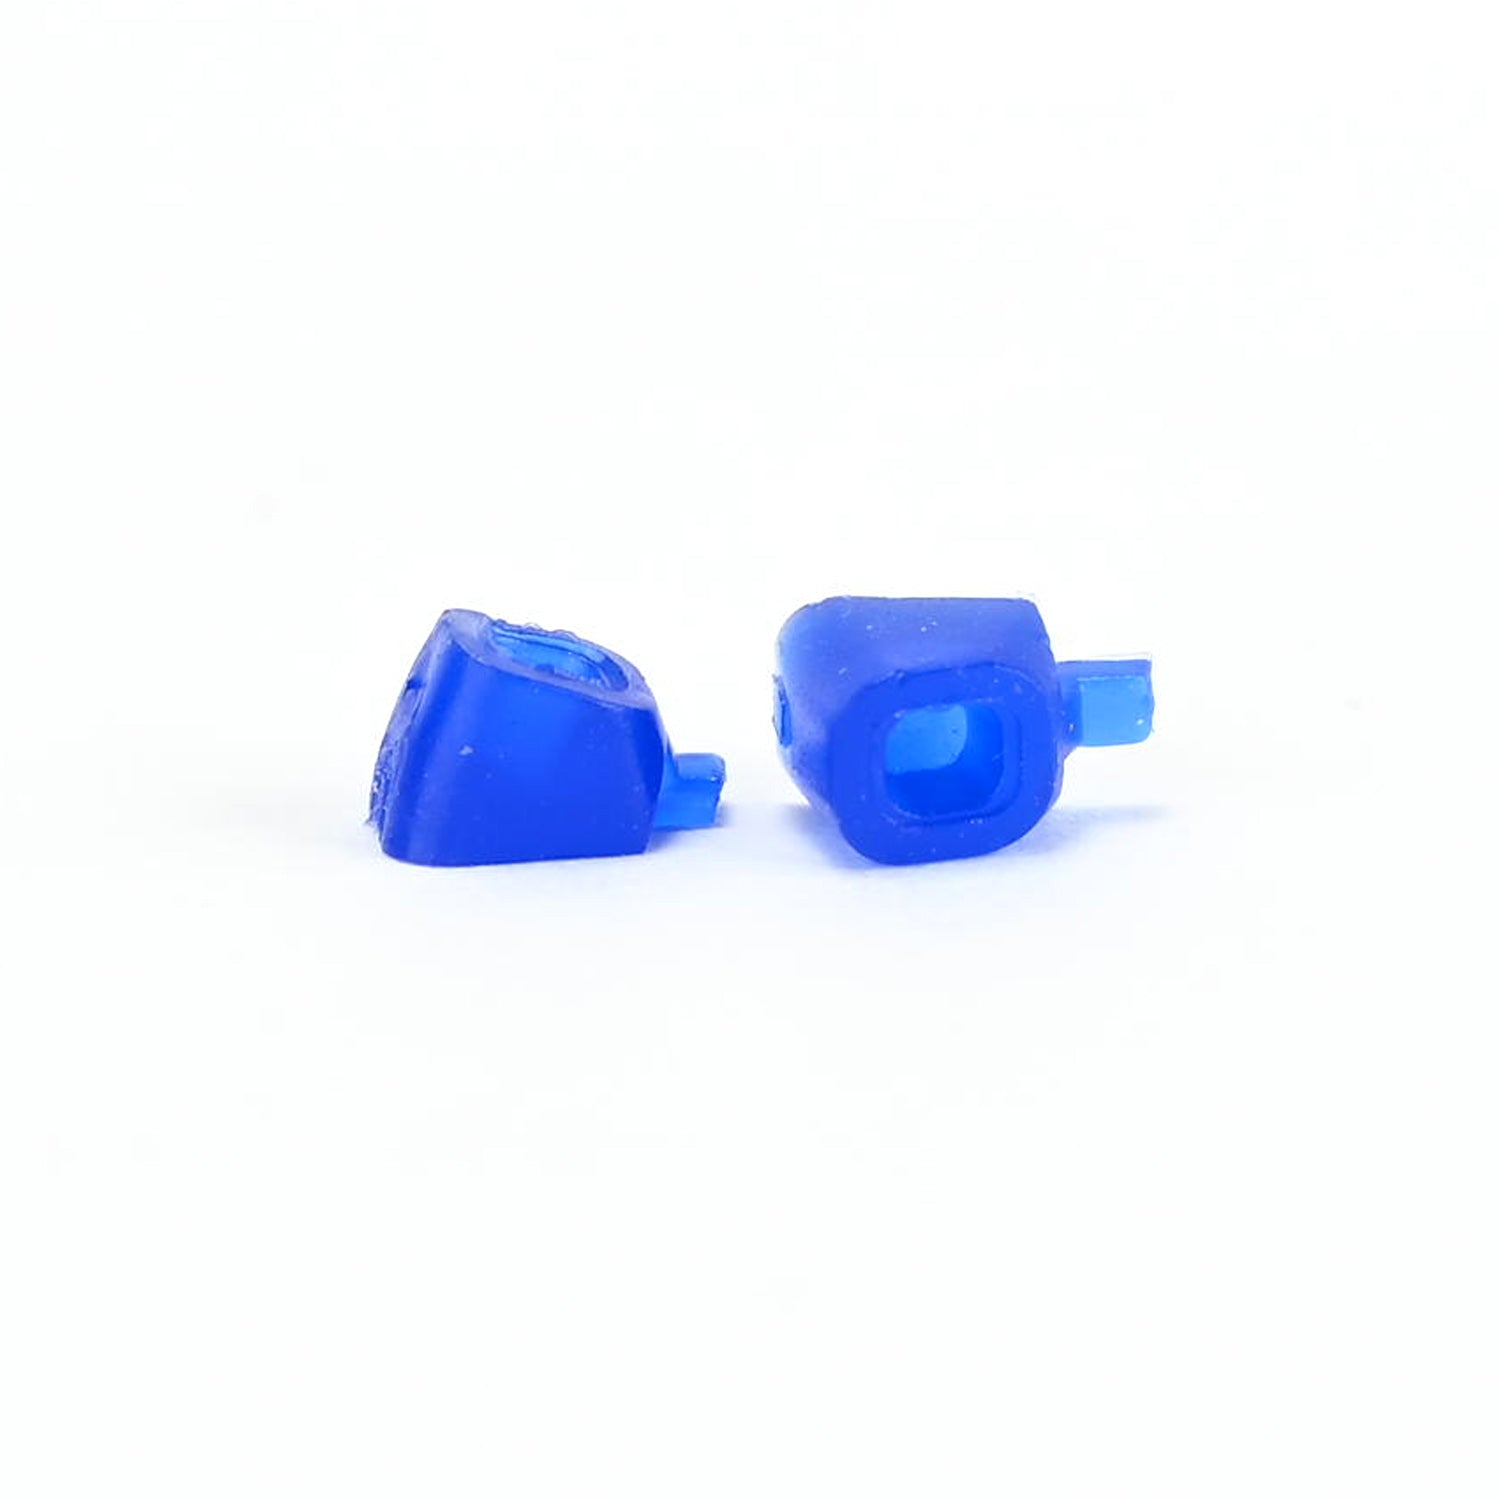 Soft Blue Blackriver First Aid Fingerboard Pivot Cups